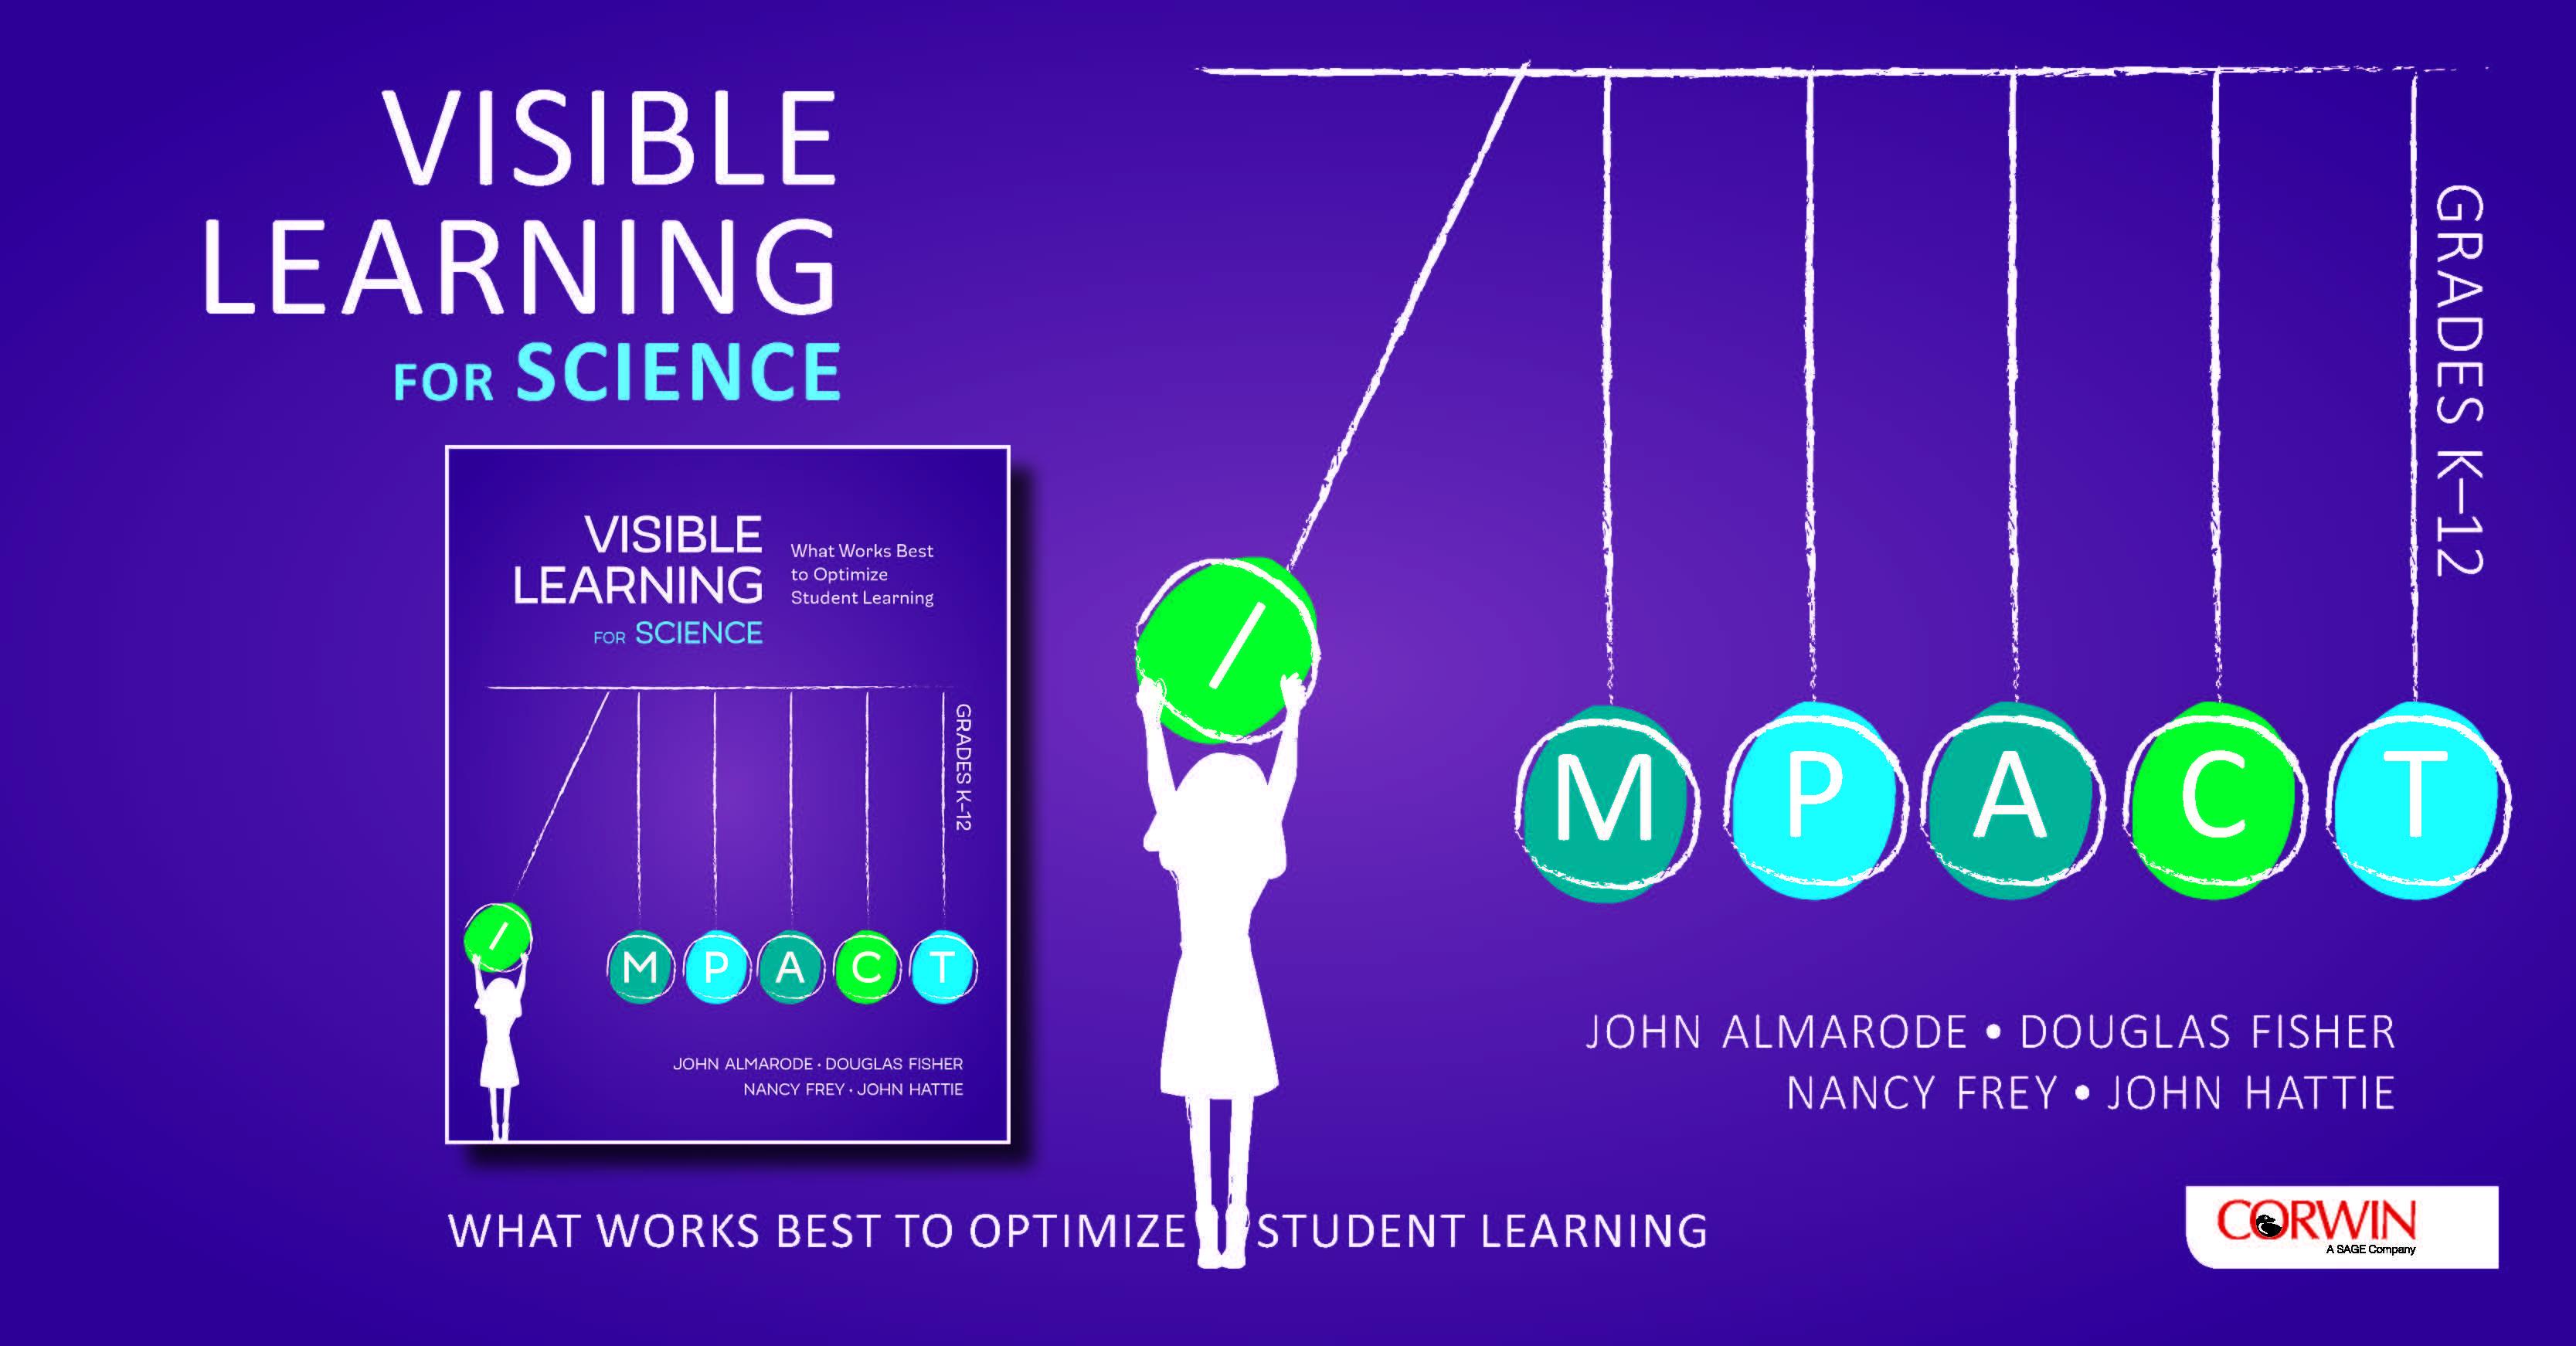 Visible Learning | Online Resources